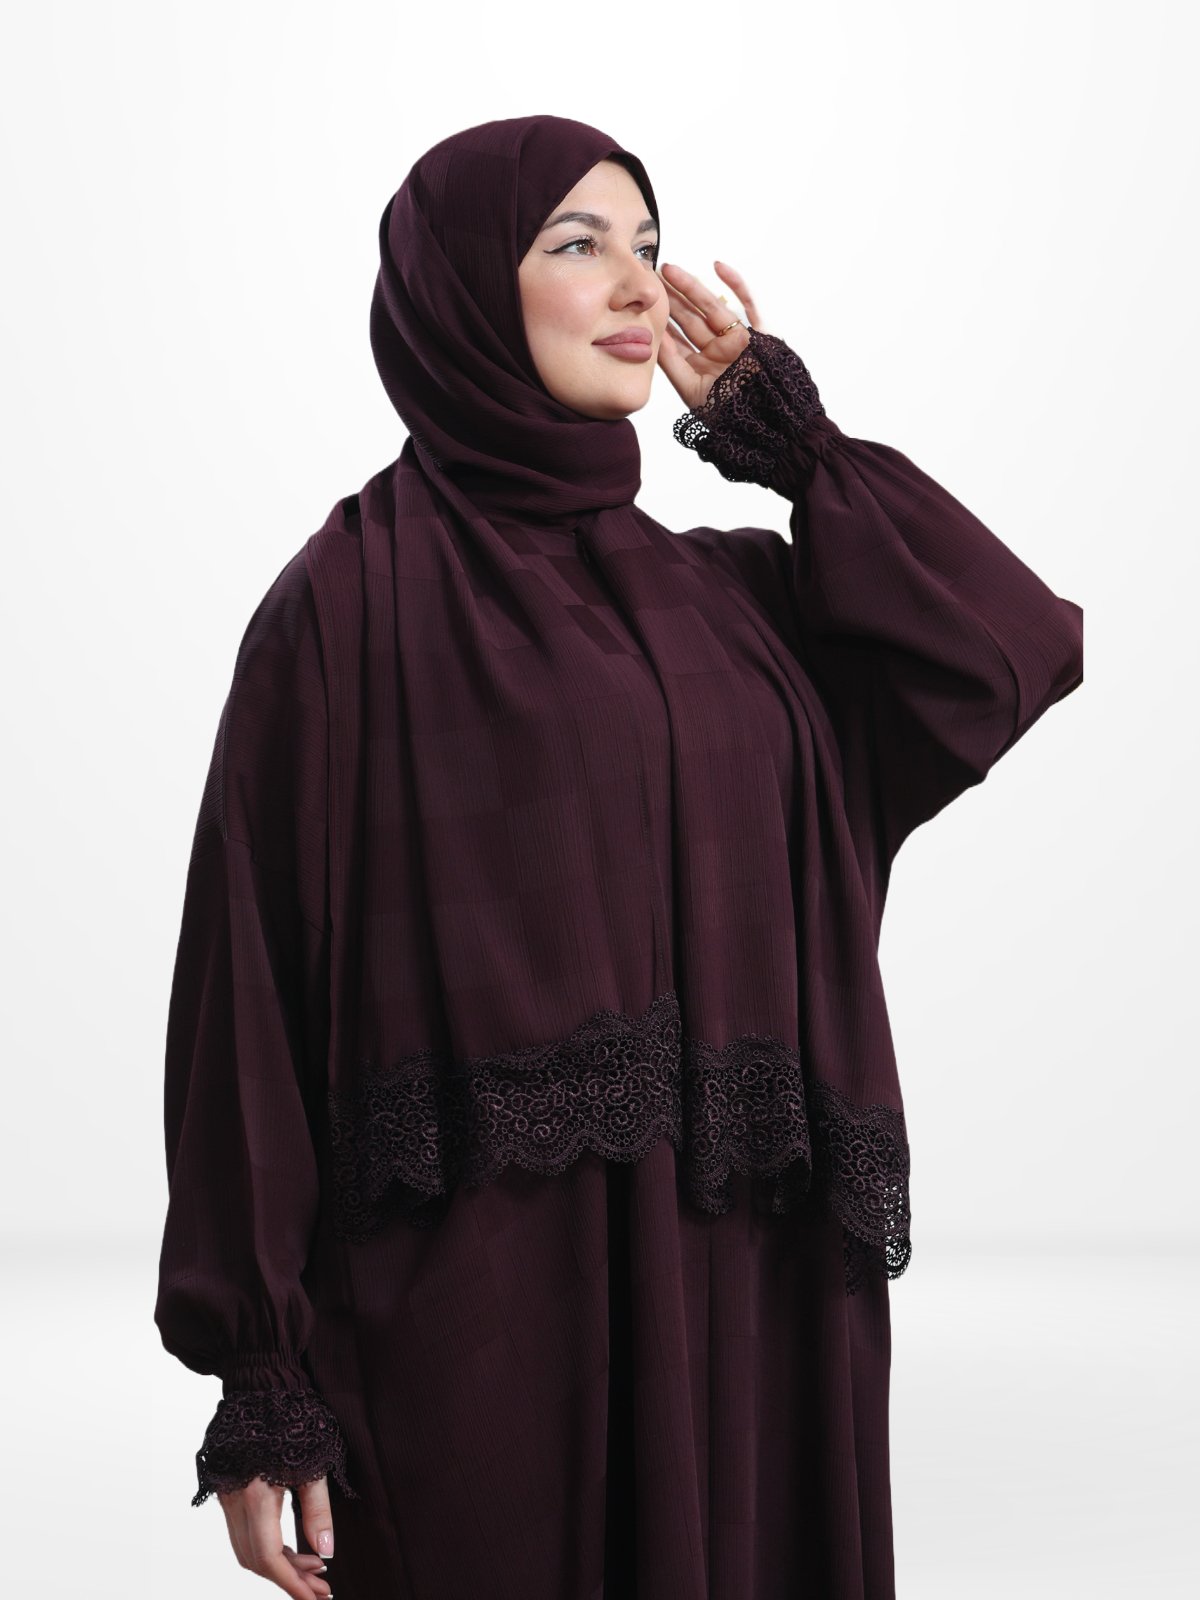 One - Piece Prayer Dress & Abaya with attached Hijab - Squared Crepe - Modest Essence